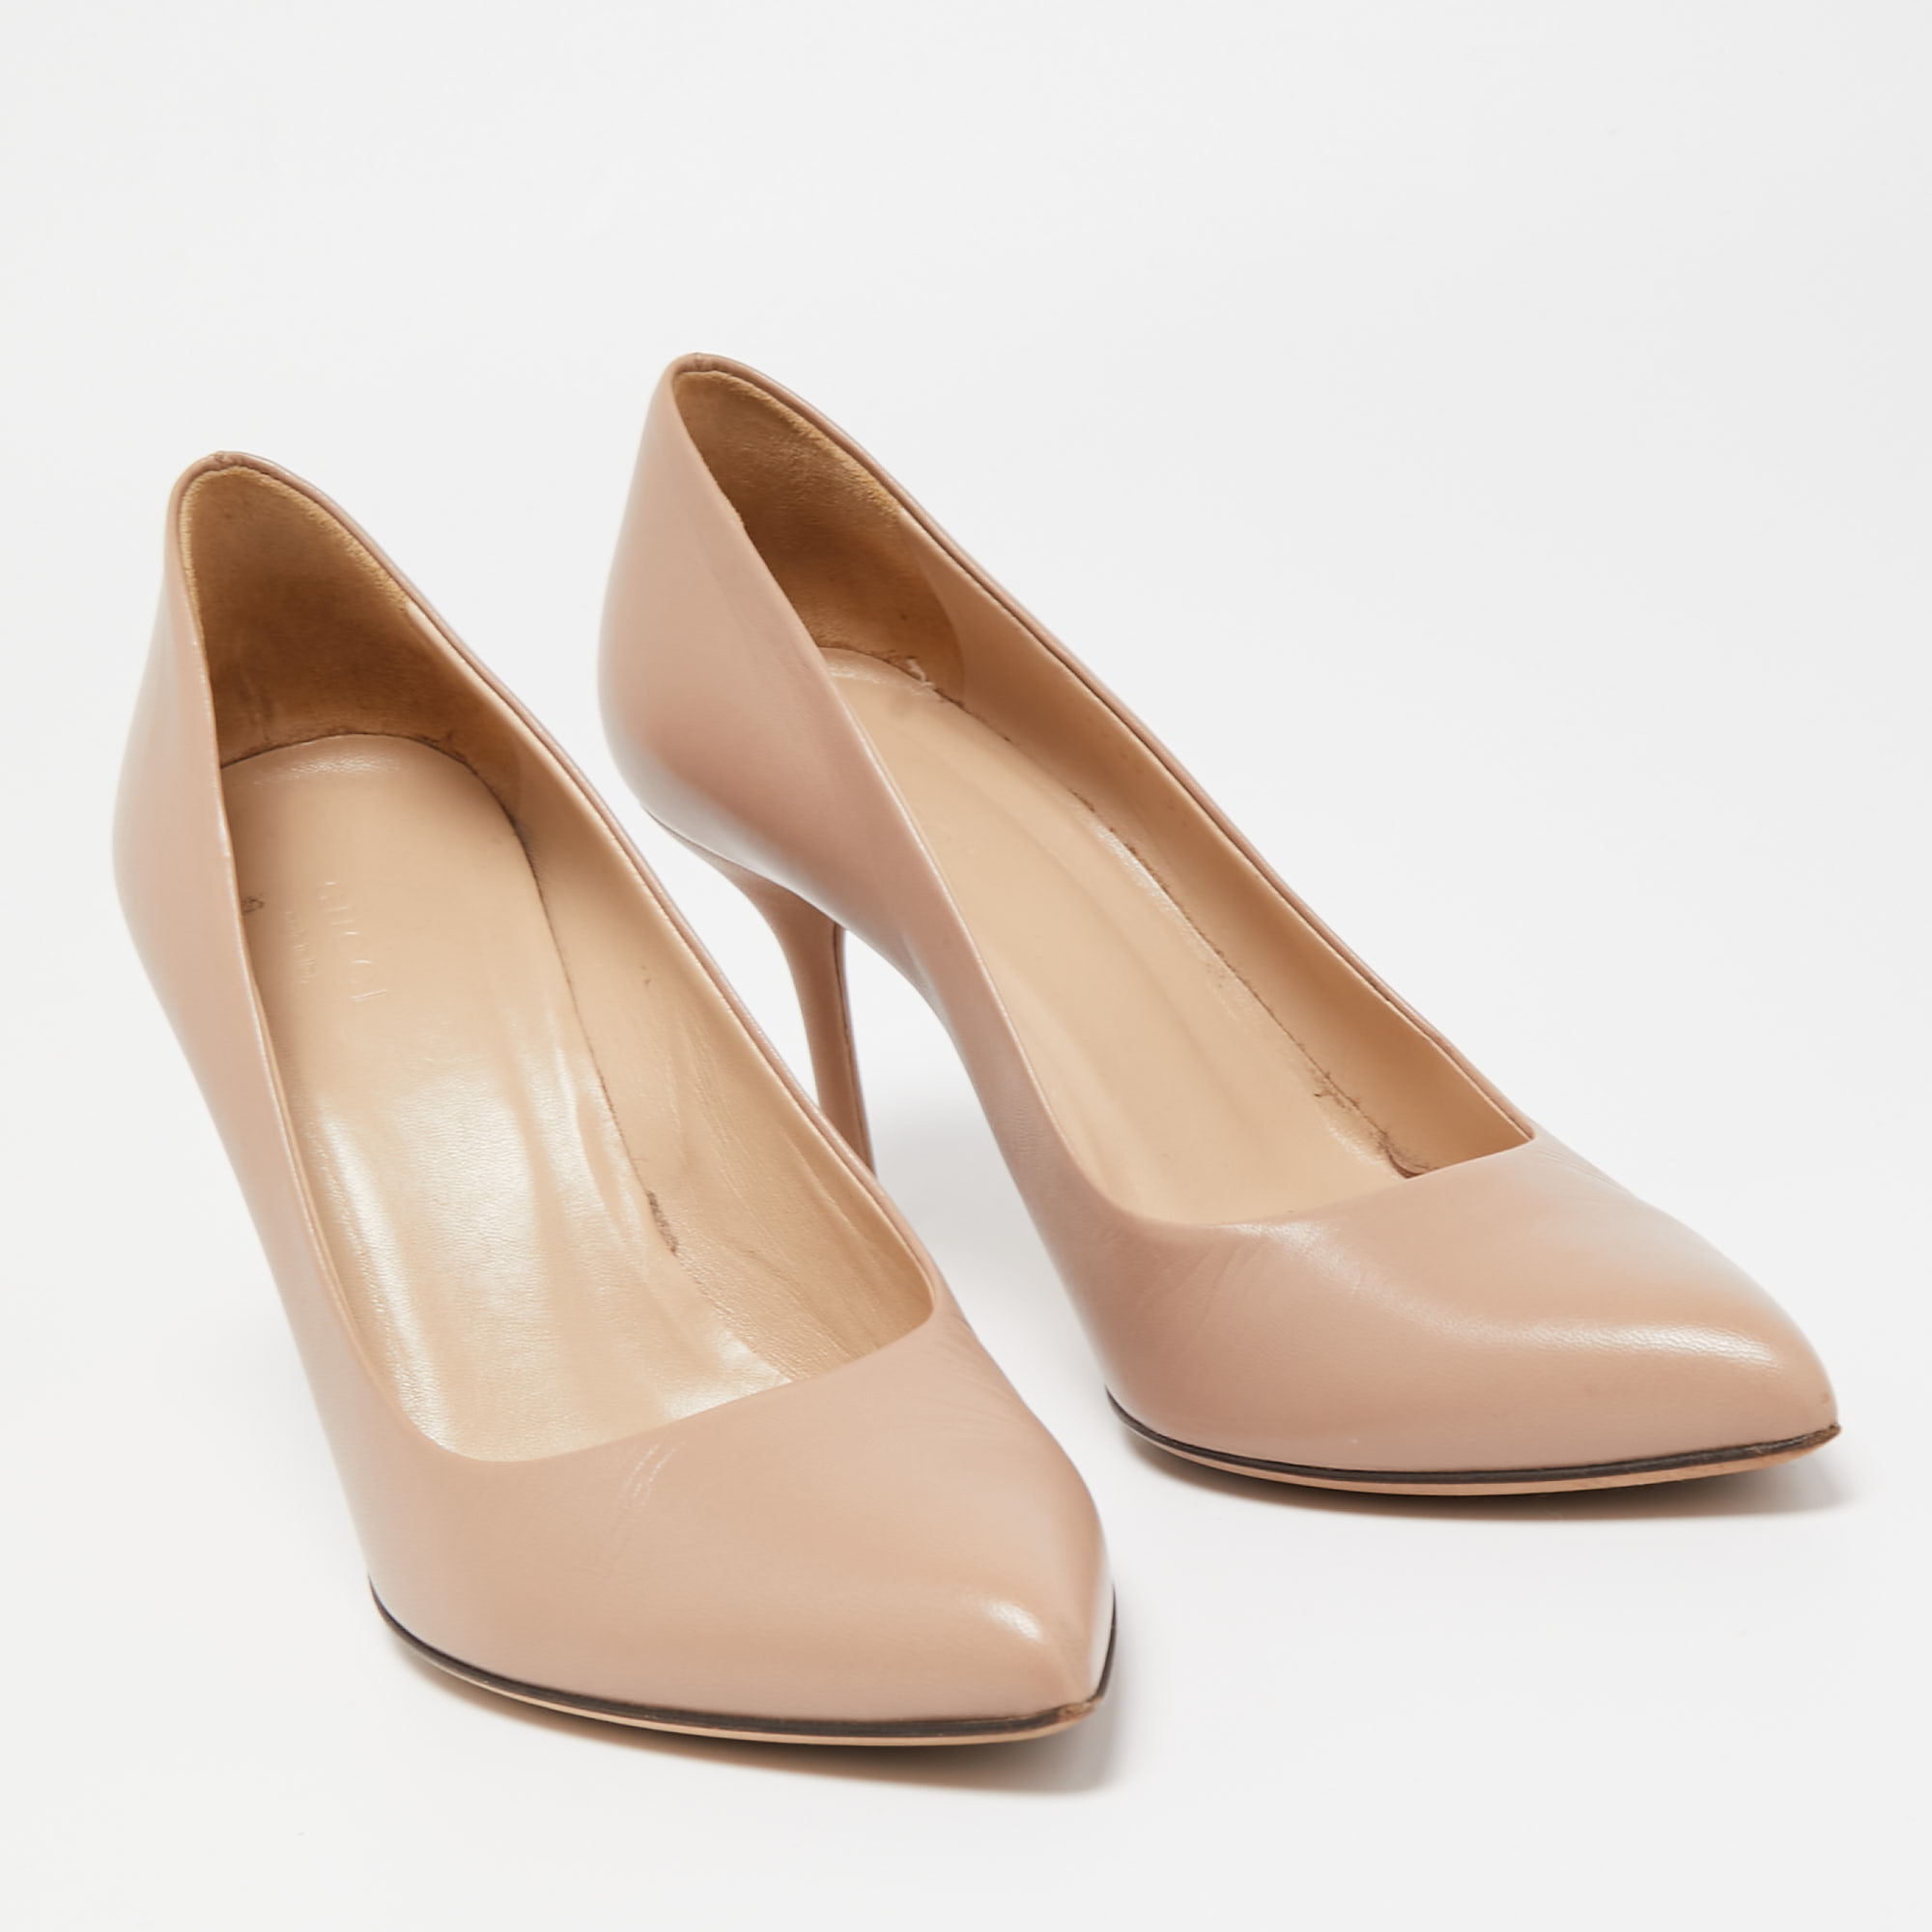 Gucci Beige Leather Pointed Toe Pumps Size 37